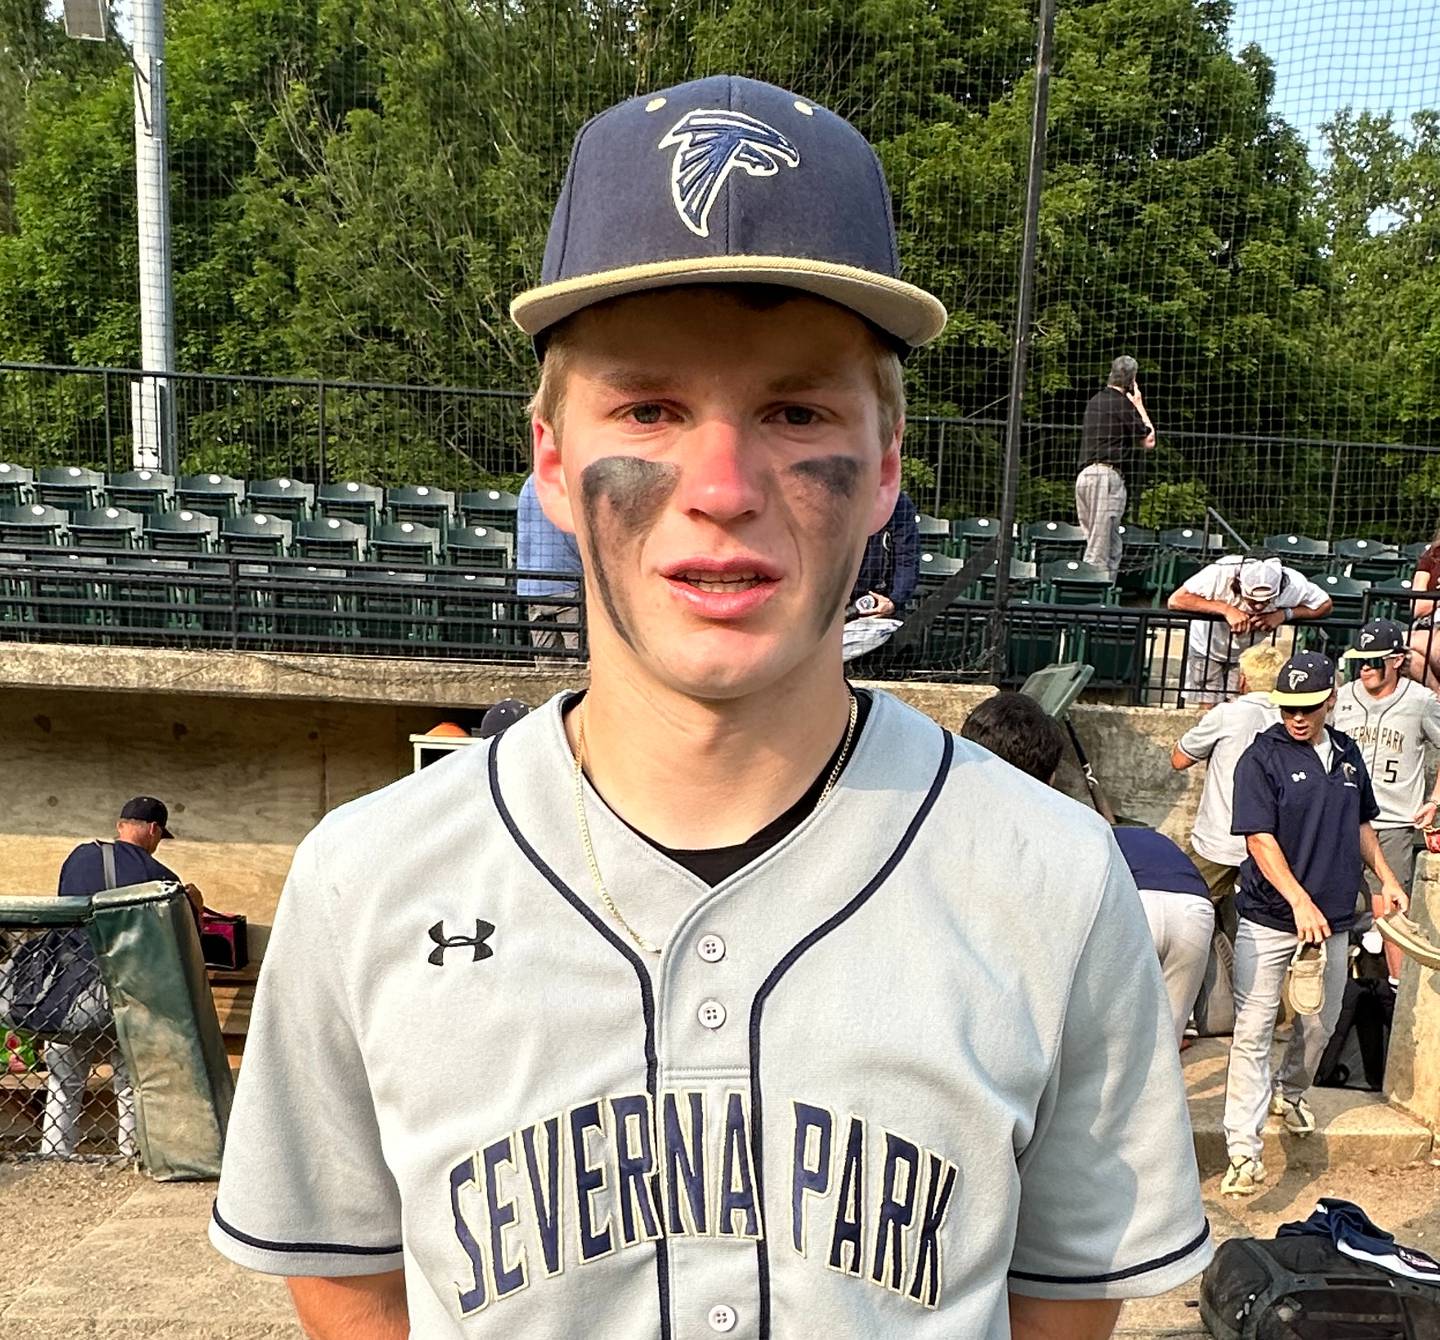 Matt Fleisher was a bright spot in an otherwise tough day for Severna Park baseball Tuesday afternoon. Fleisher homered to lead off the fourth inning for the No. 2 Falcons, who lost to two-time defending state 4A champ Sherwood, 9-2, in a state semifinal contest at Shirley Povich Field in Montgomery County.